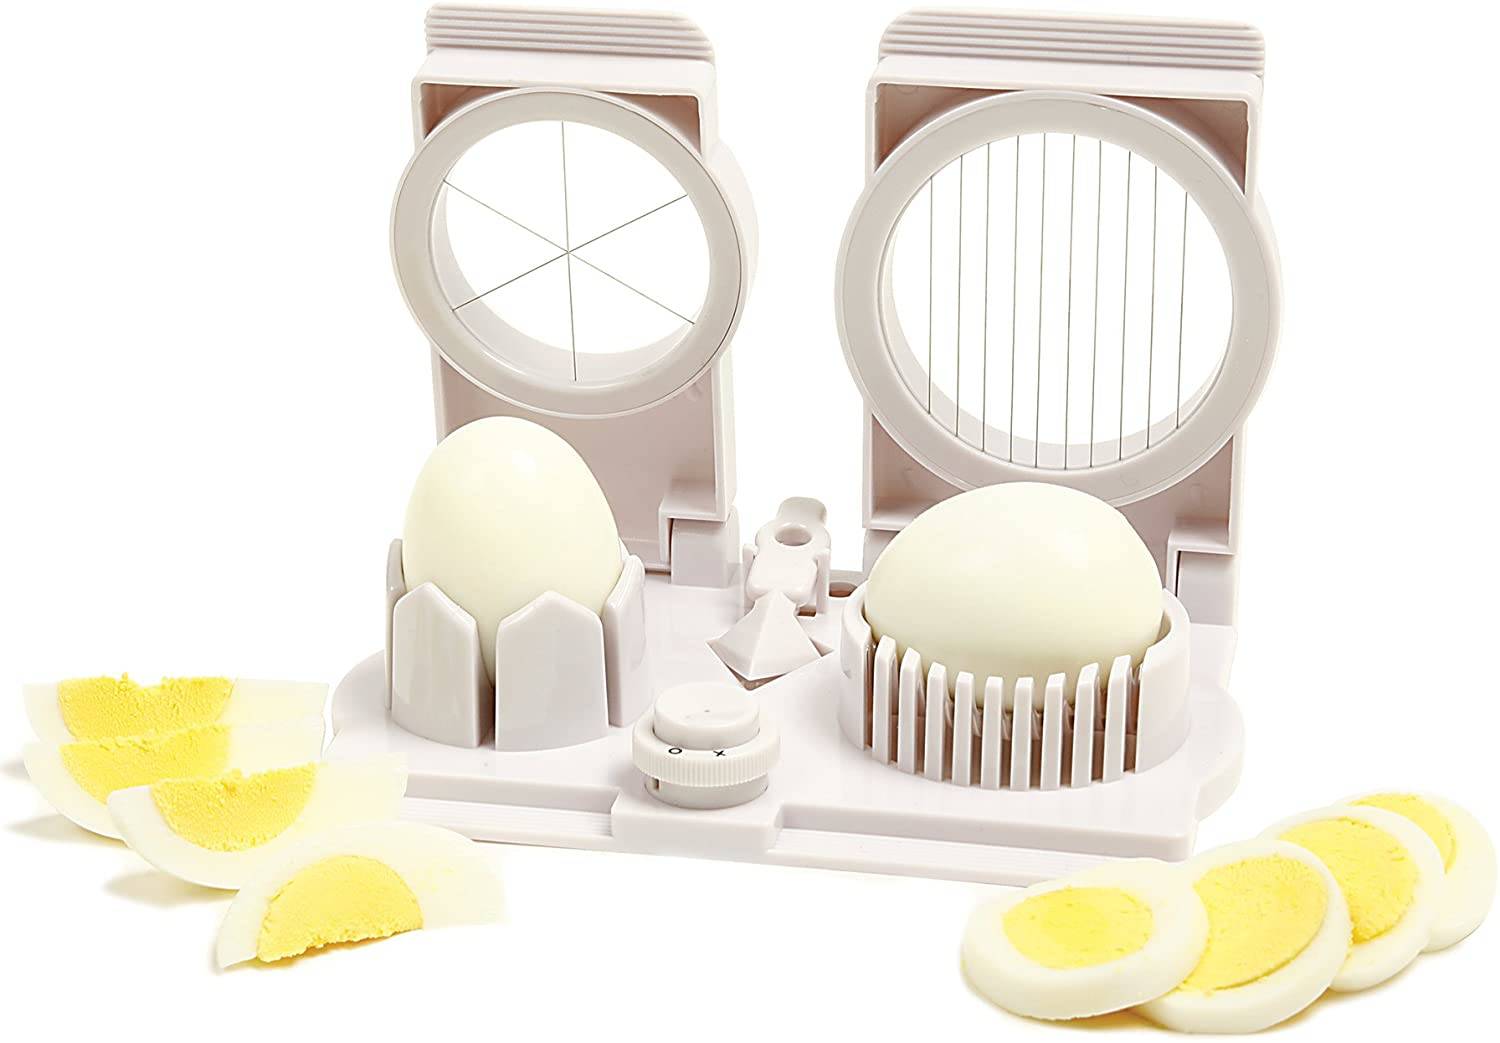 Egg Slicer Dicer For Hard Boiled Eggs Stainless Steel Blades Cutter Tool  With Rotating Base Multifunction Kitchen Creative Gadge - AliExpress